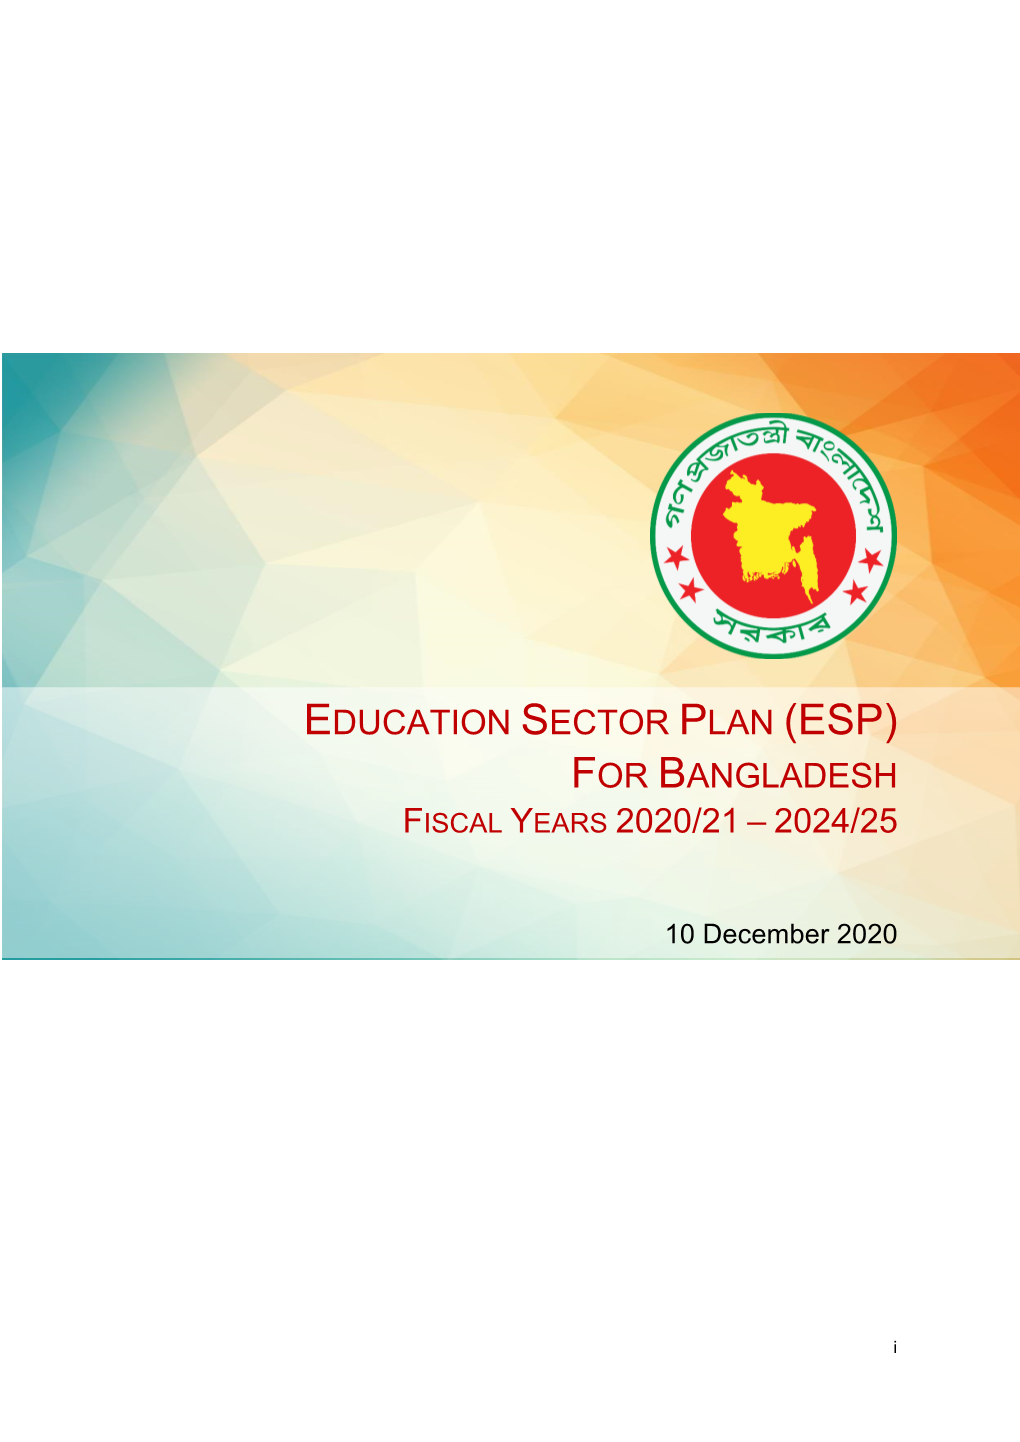 Education Sector Plan (Esp) for Bangladesh Fiscal Years 2020/21 – 2024/25